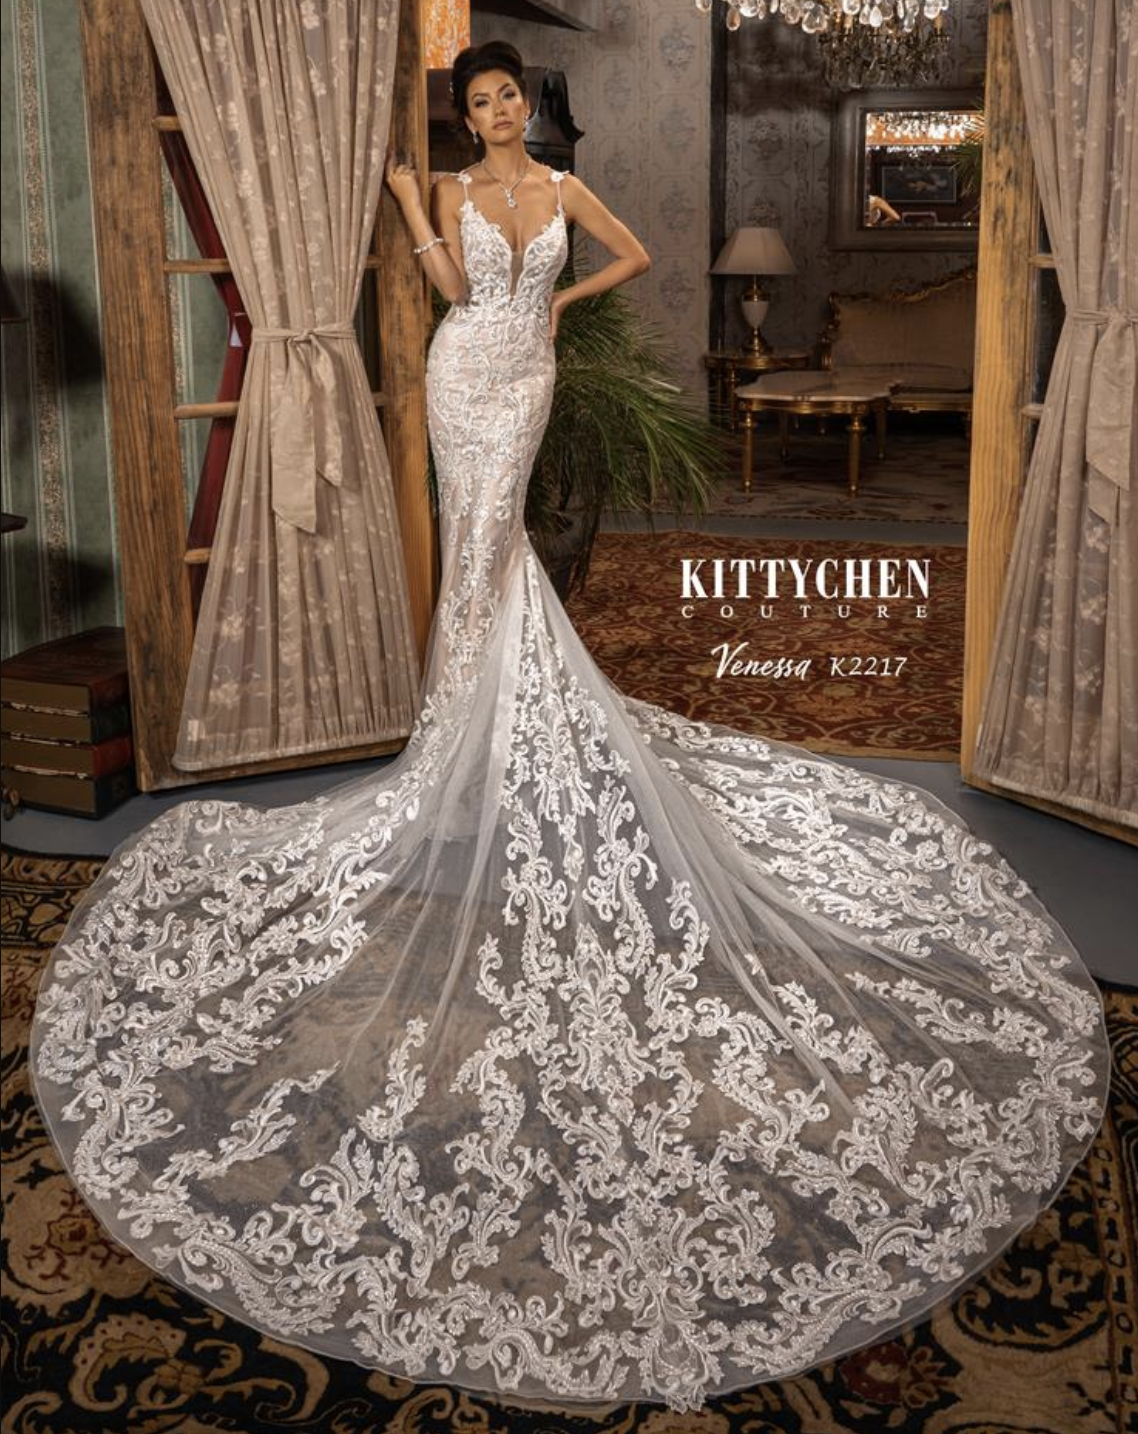 Kitty Chen Couture Trunk Show